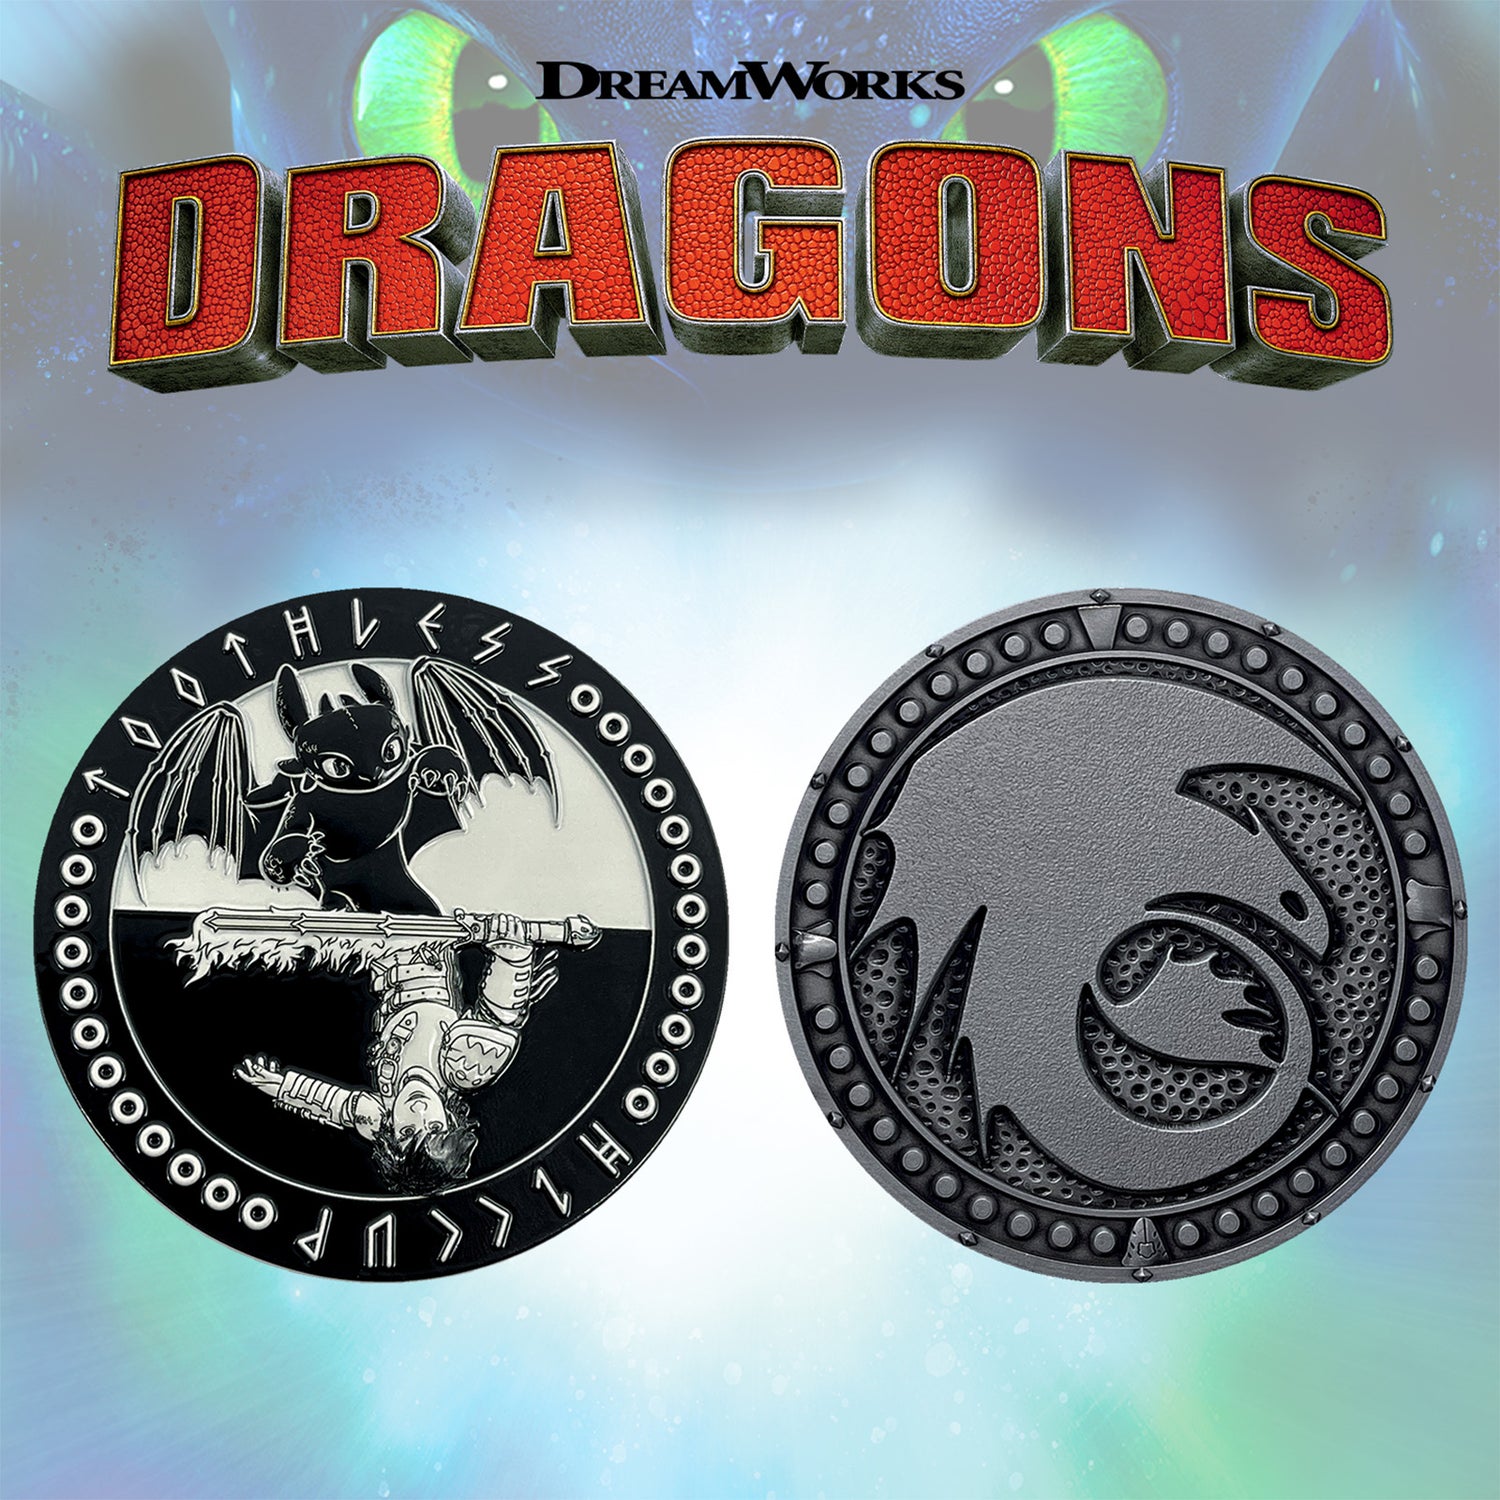 How To Train Your Dragon Limited Edition Medallion By Fanattik